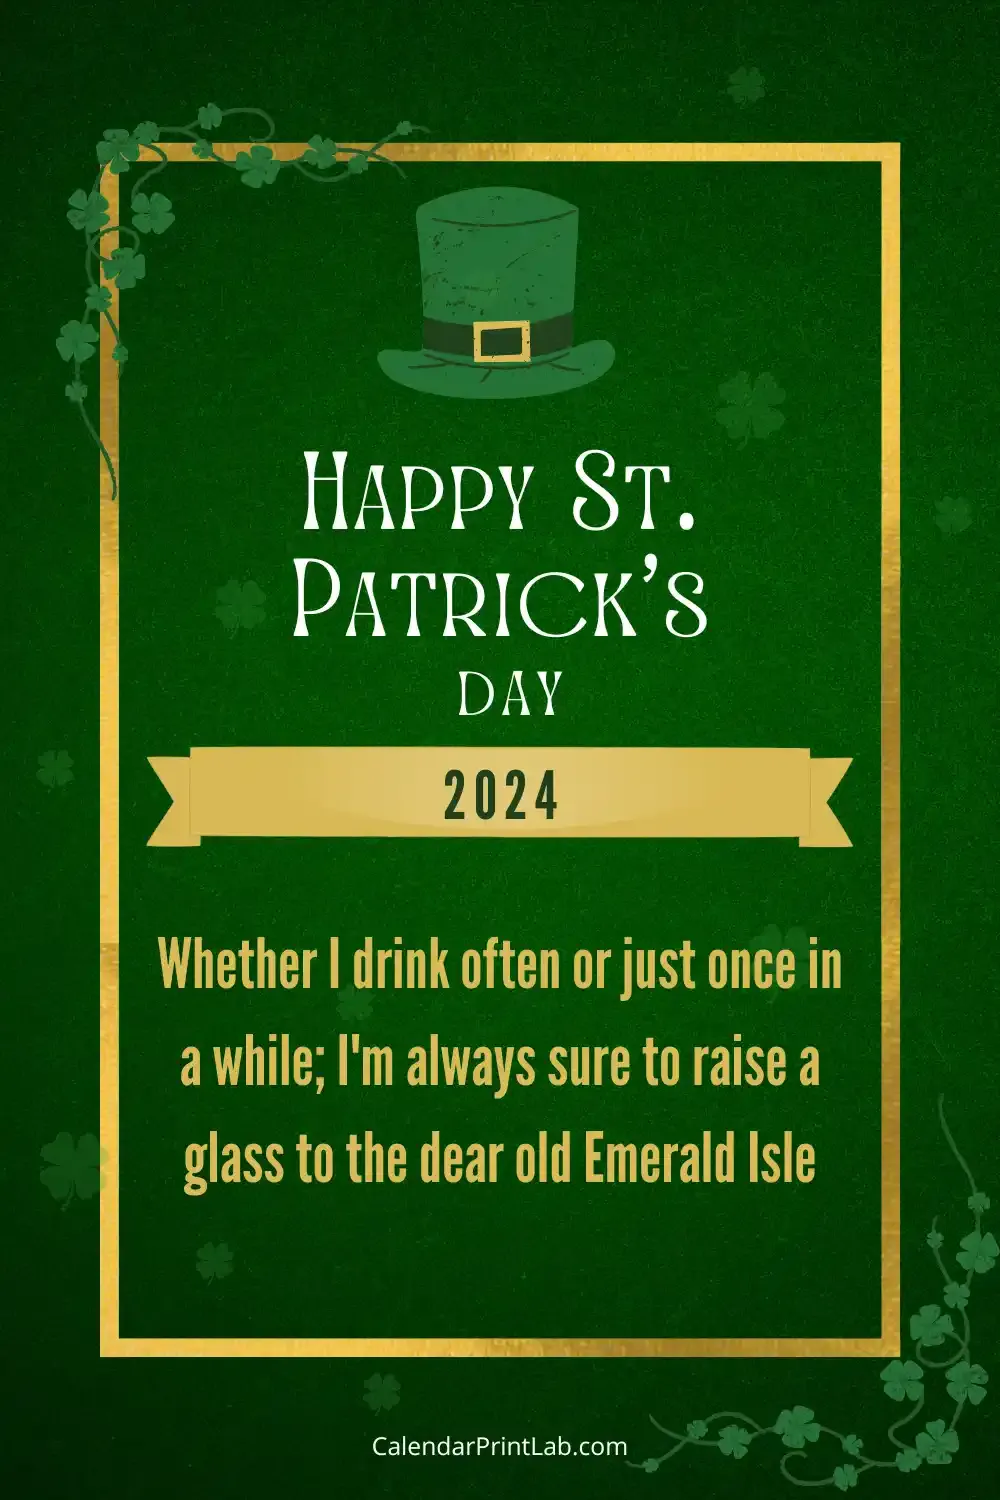 Happy St. Patrick's Day Wishes Image